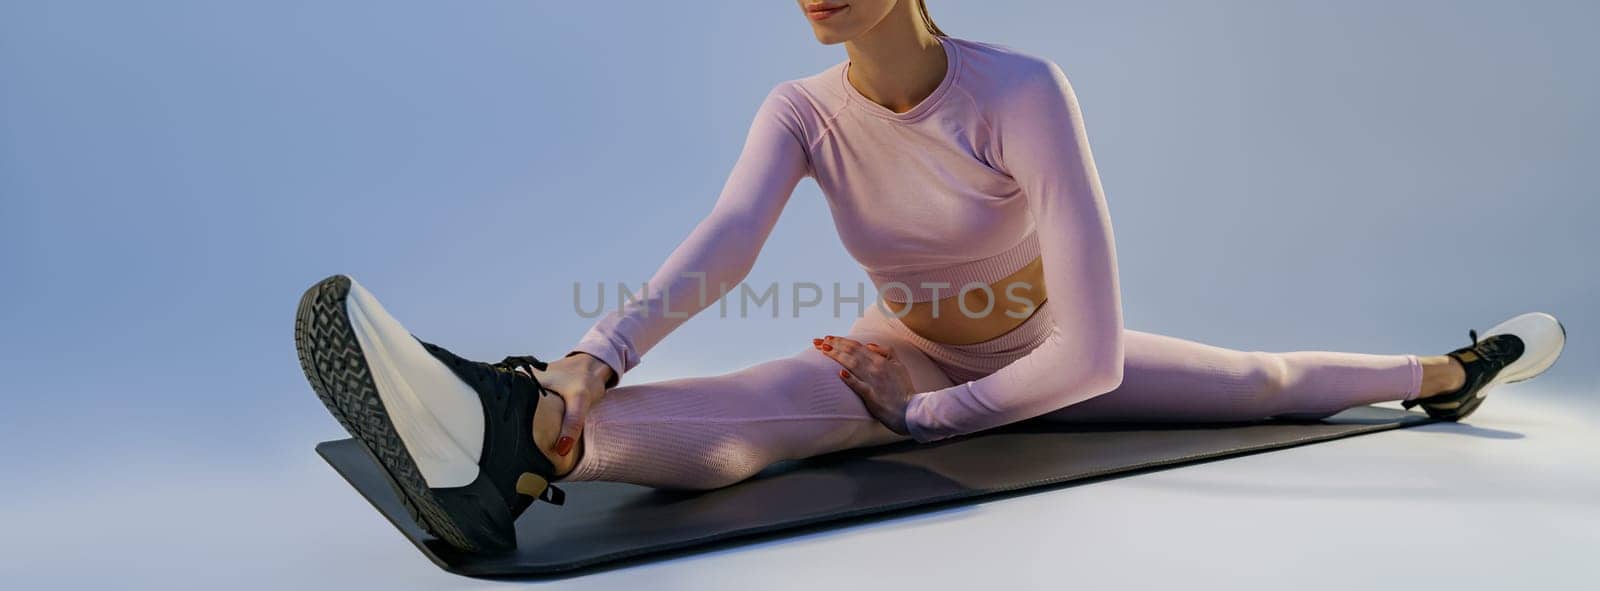 Sporty woman doing stretching exercises on yoga mat on studio background. Healthy lifestyle by Yaroslav_astakhov